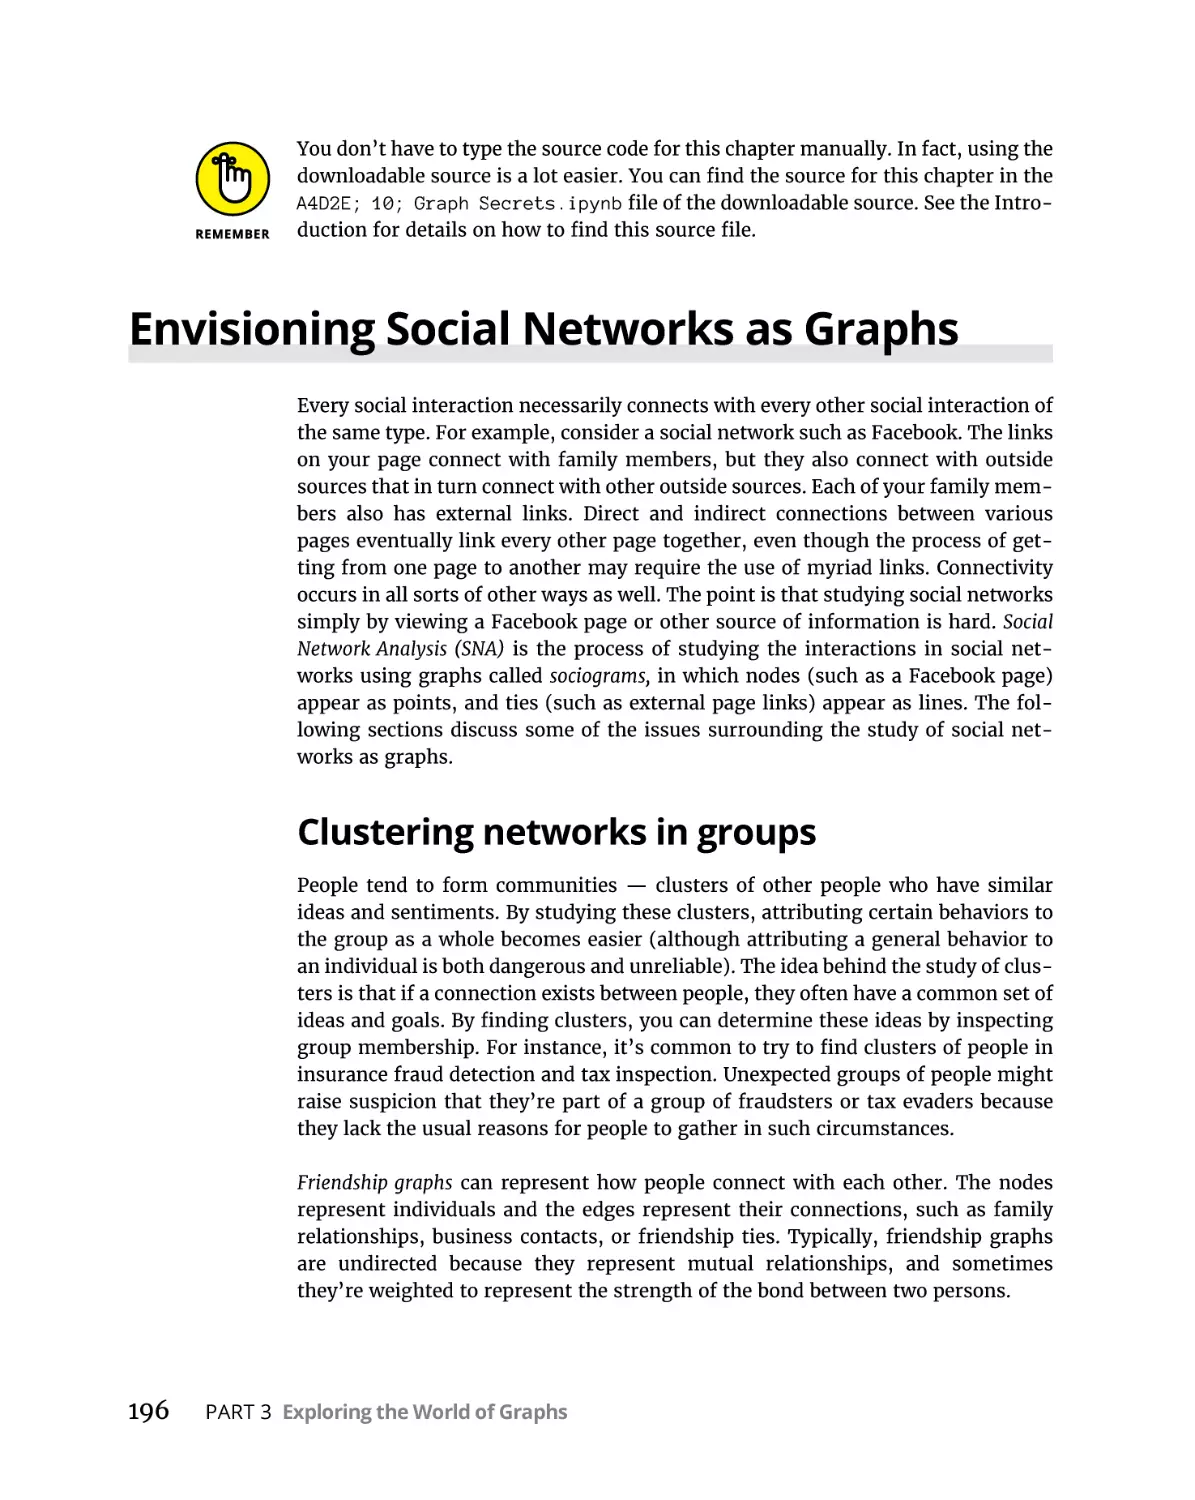 Envisioning Social Networks as Graphs
Clustering networks in groups